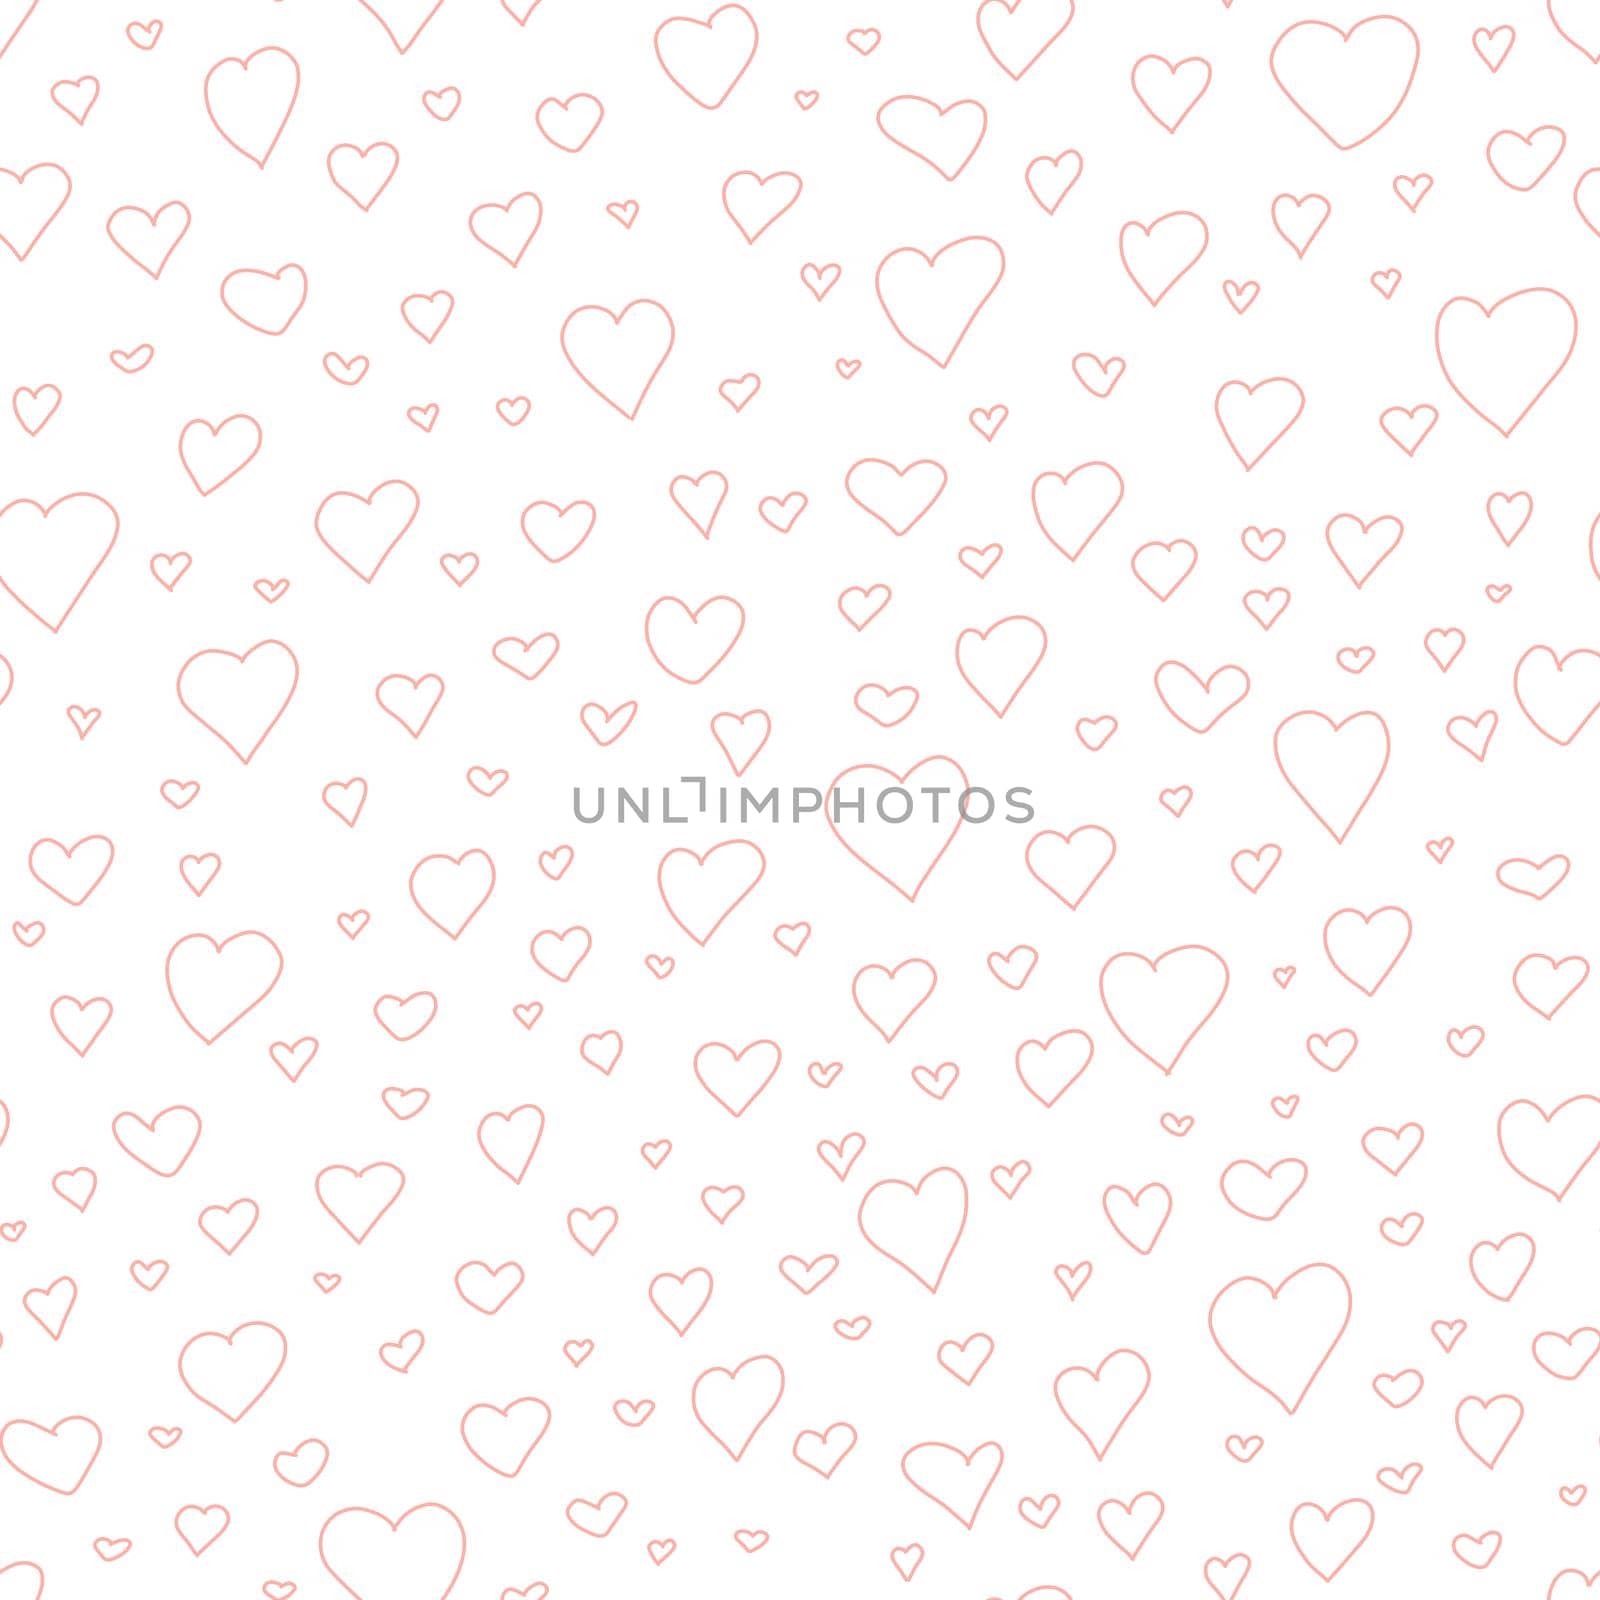 Valentine's day, Mother's Day hand drawn doodle seamless pattern. Marker drawn different heart shapes and silhouettes. Sweet love texture for postcards,wrapping paper, textiles and decorative prints.